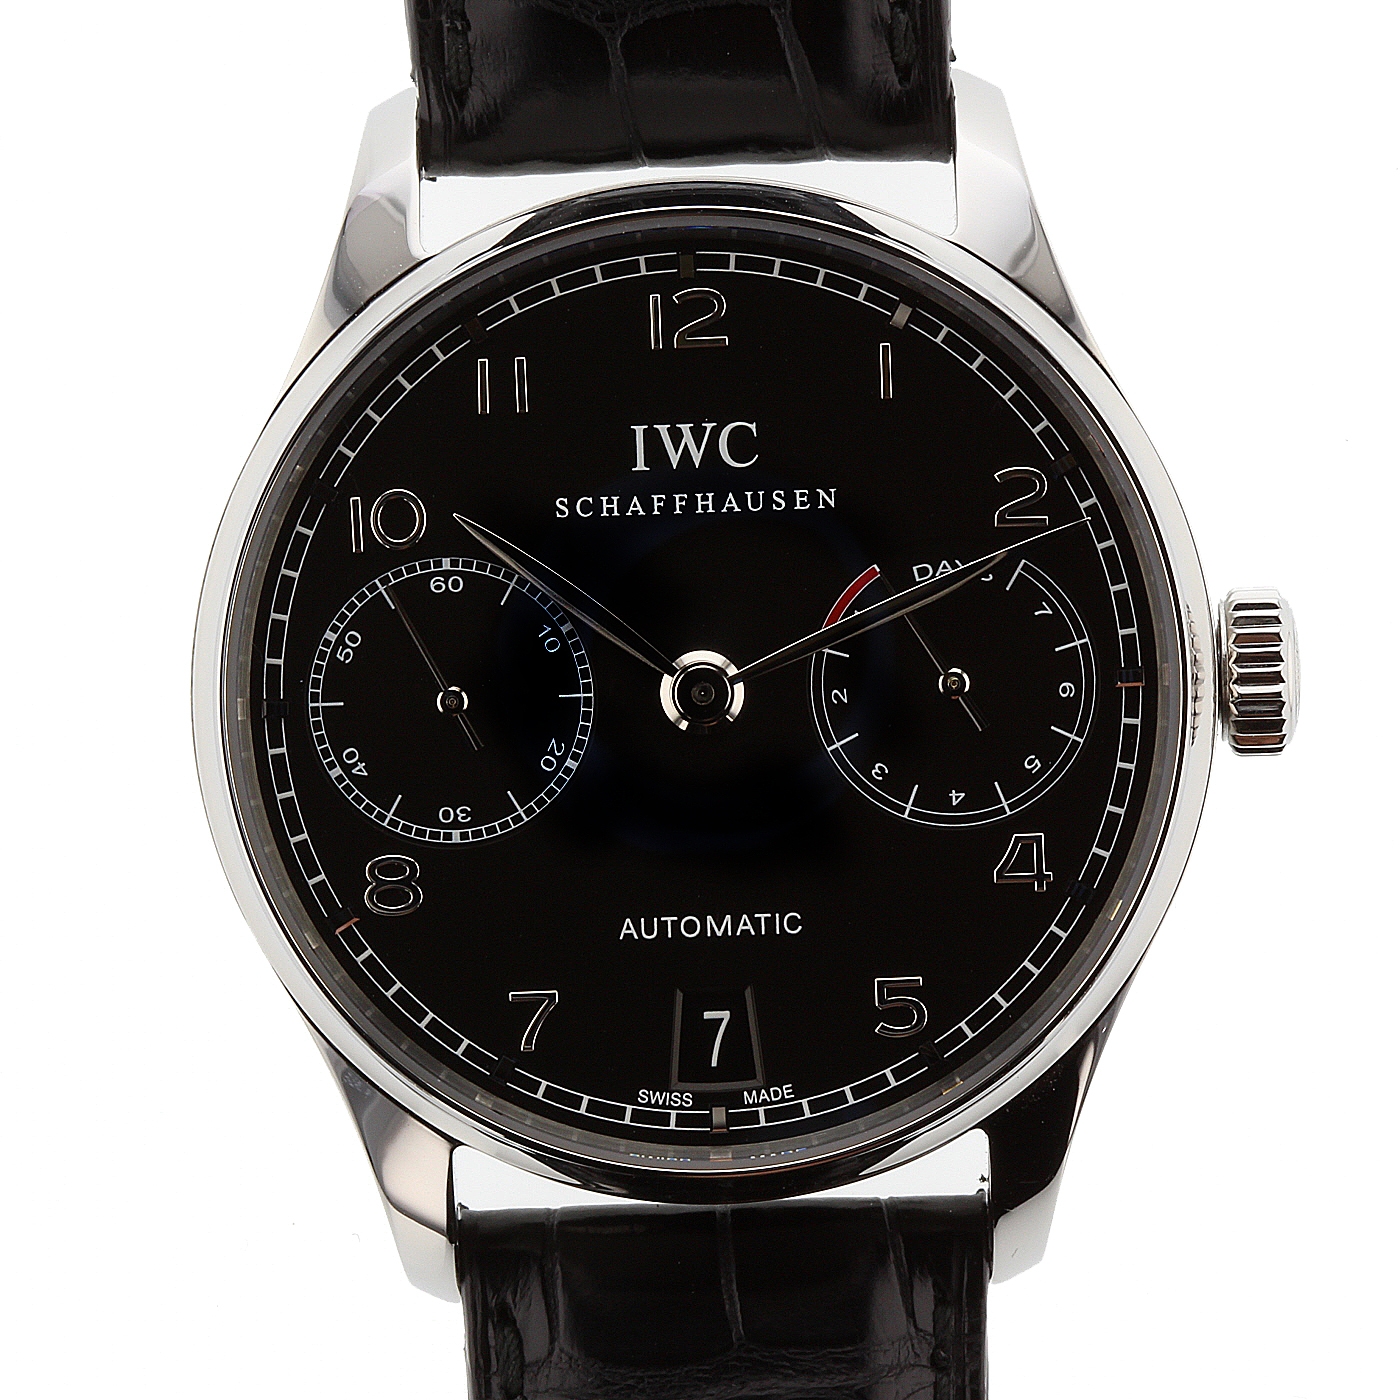 iwc-portugieser-automatic-7-day-power-reserve-42-3mm-iw500109-mens